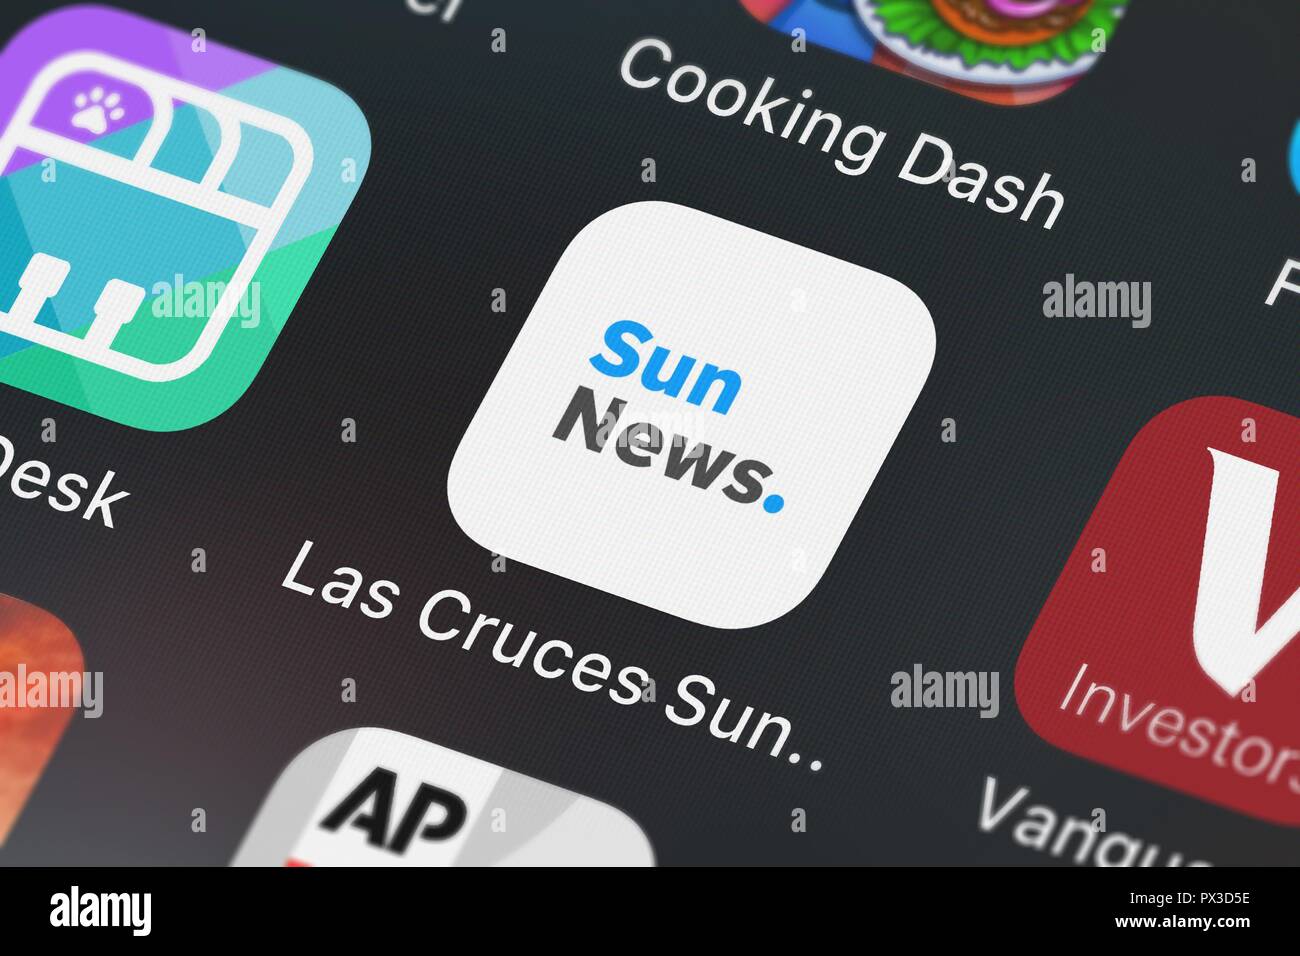 London, United Kingdom - October 19, 2018: Close-up shot of the Las Cruces Sun News application icon from Gannett on an iPhone. Stock Photo